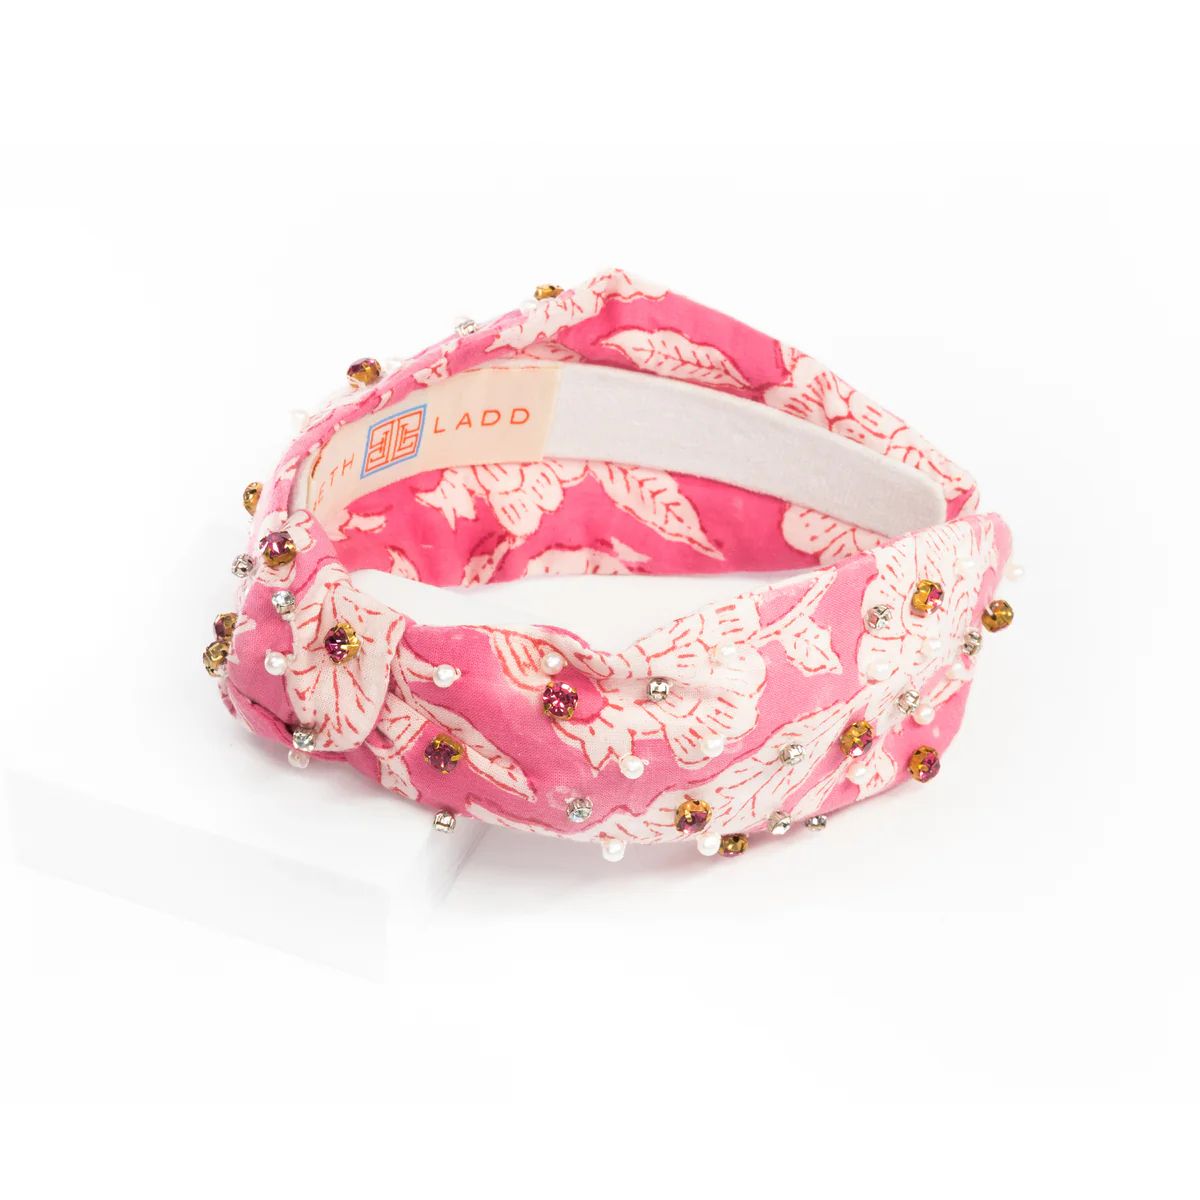 Block Print Headband with Gems in Palm Beach Pink | Beth Ladd Collections